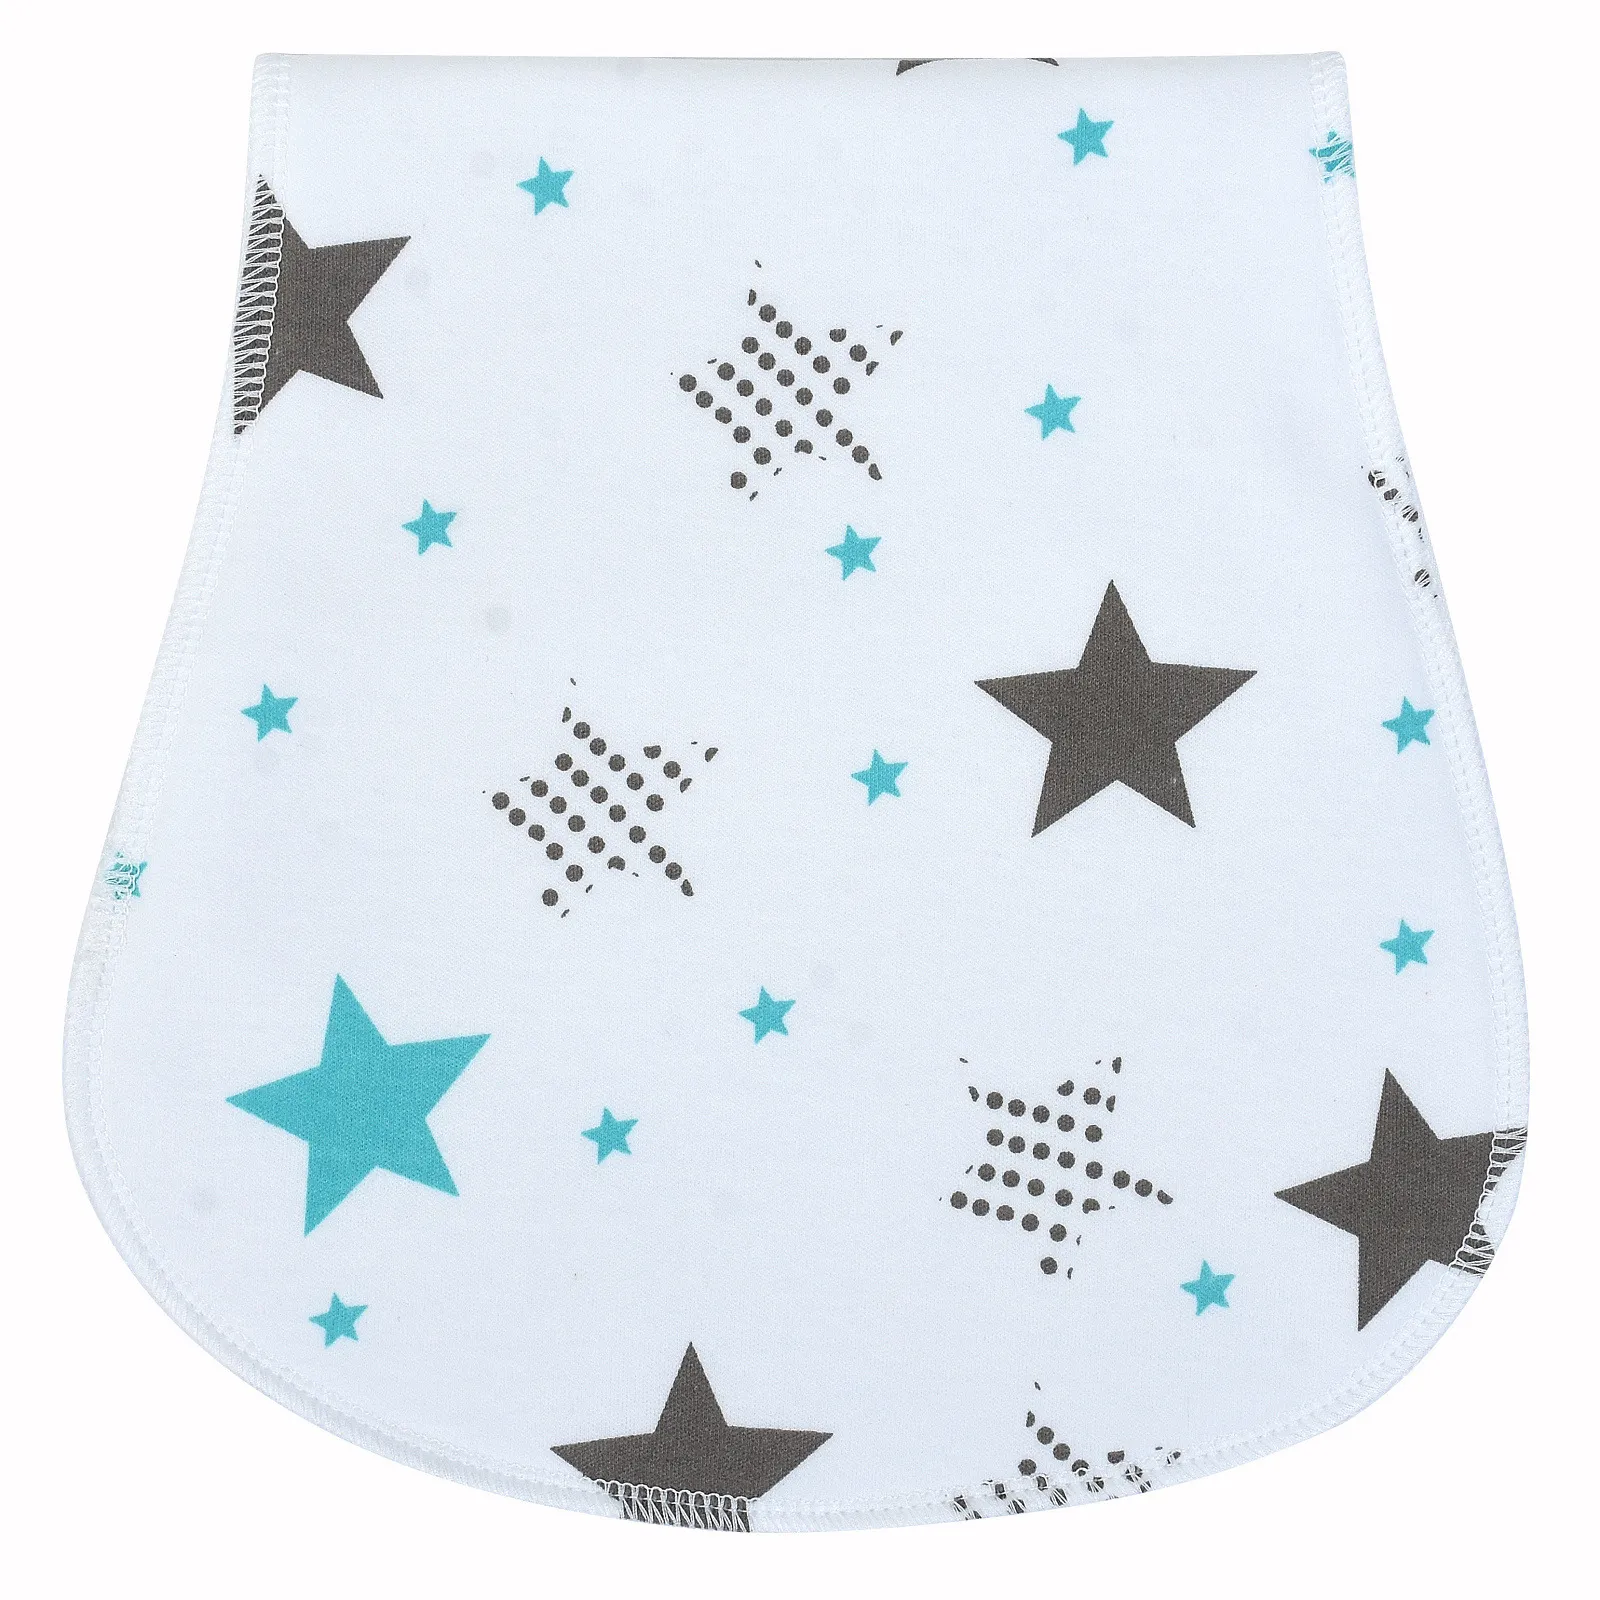 Burn Cloth 100% Cotton Washcloths Burping Cloths Extra Absorbent And Soft For Boys And Girls